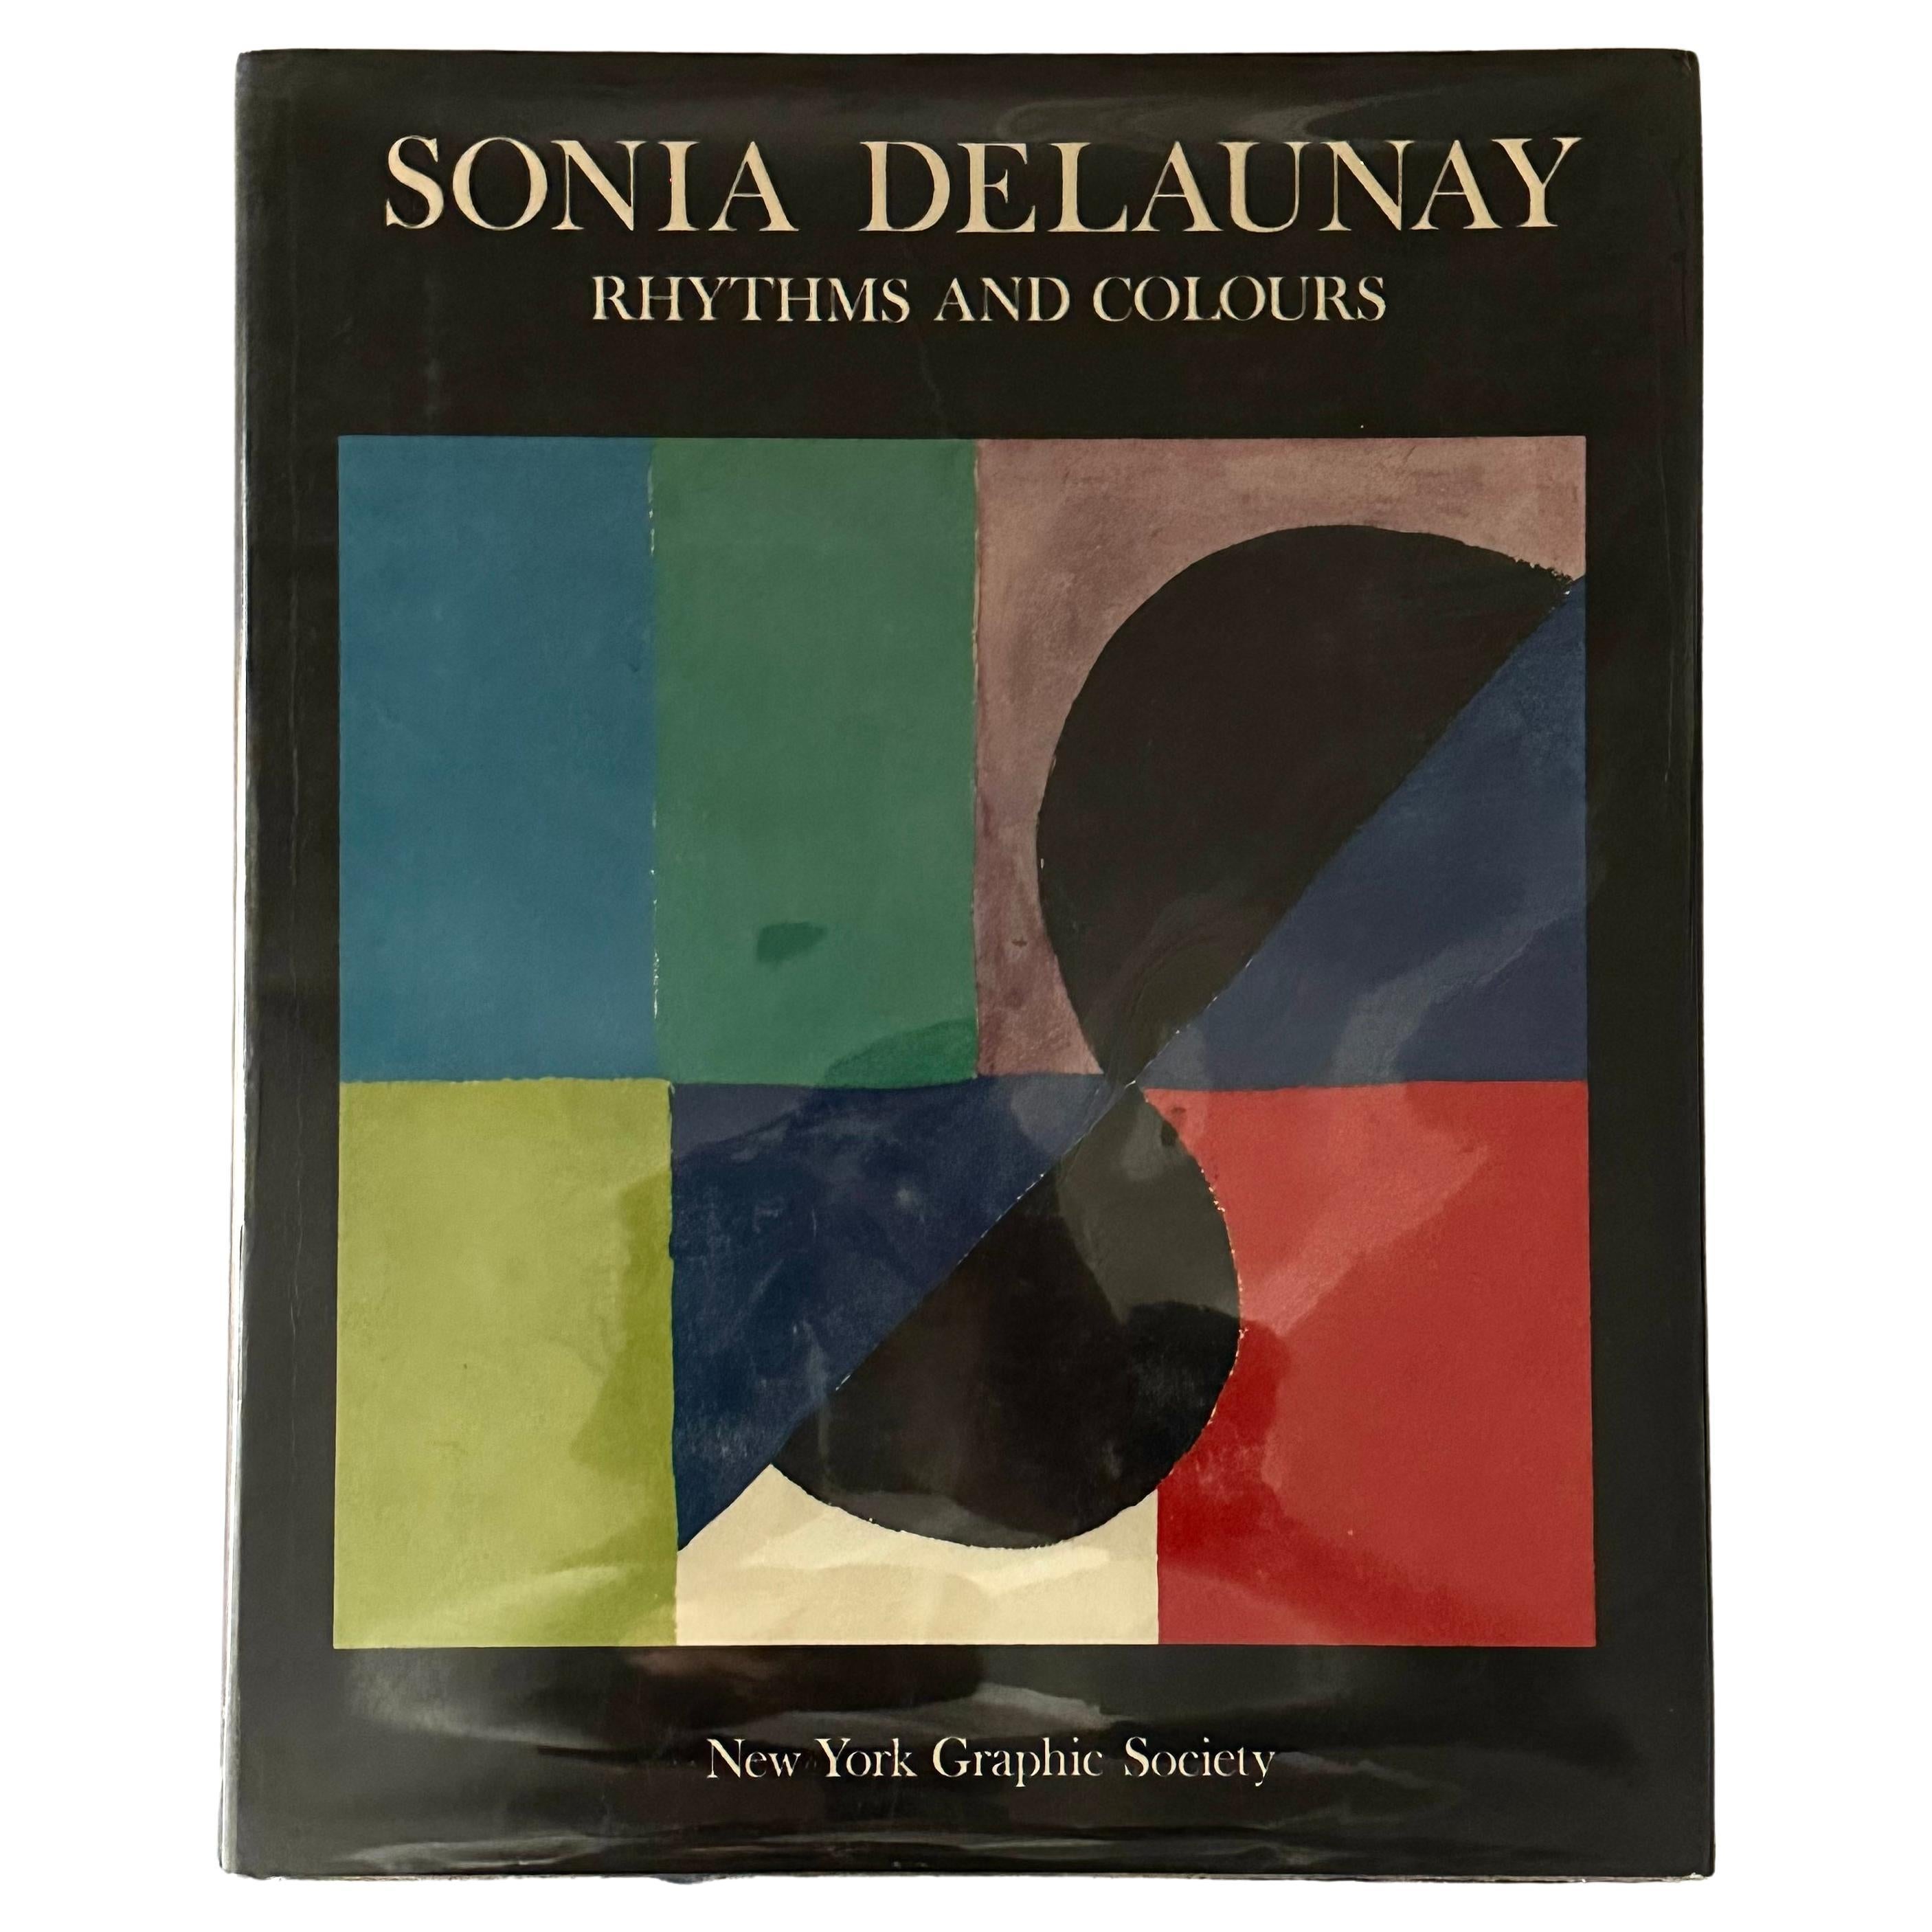 Sonia Delaunay: Rhythms and Colours - jacques Damase - 1st UK edition, 1972 For Sale